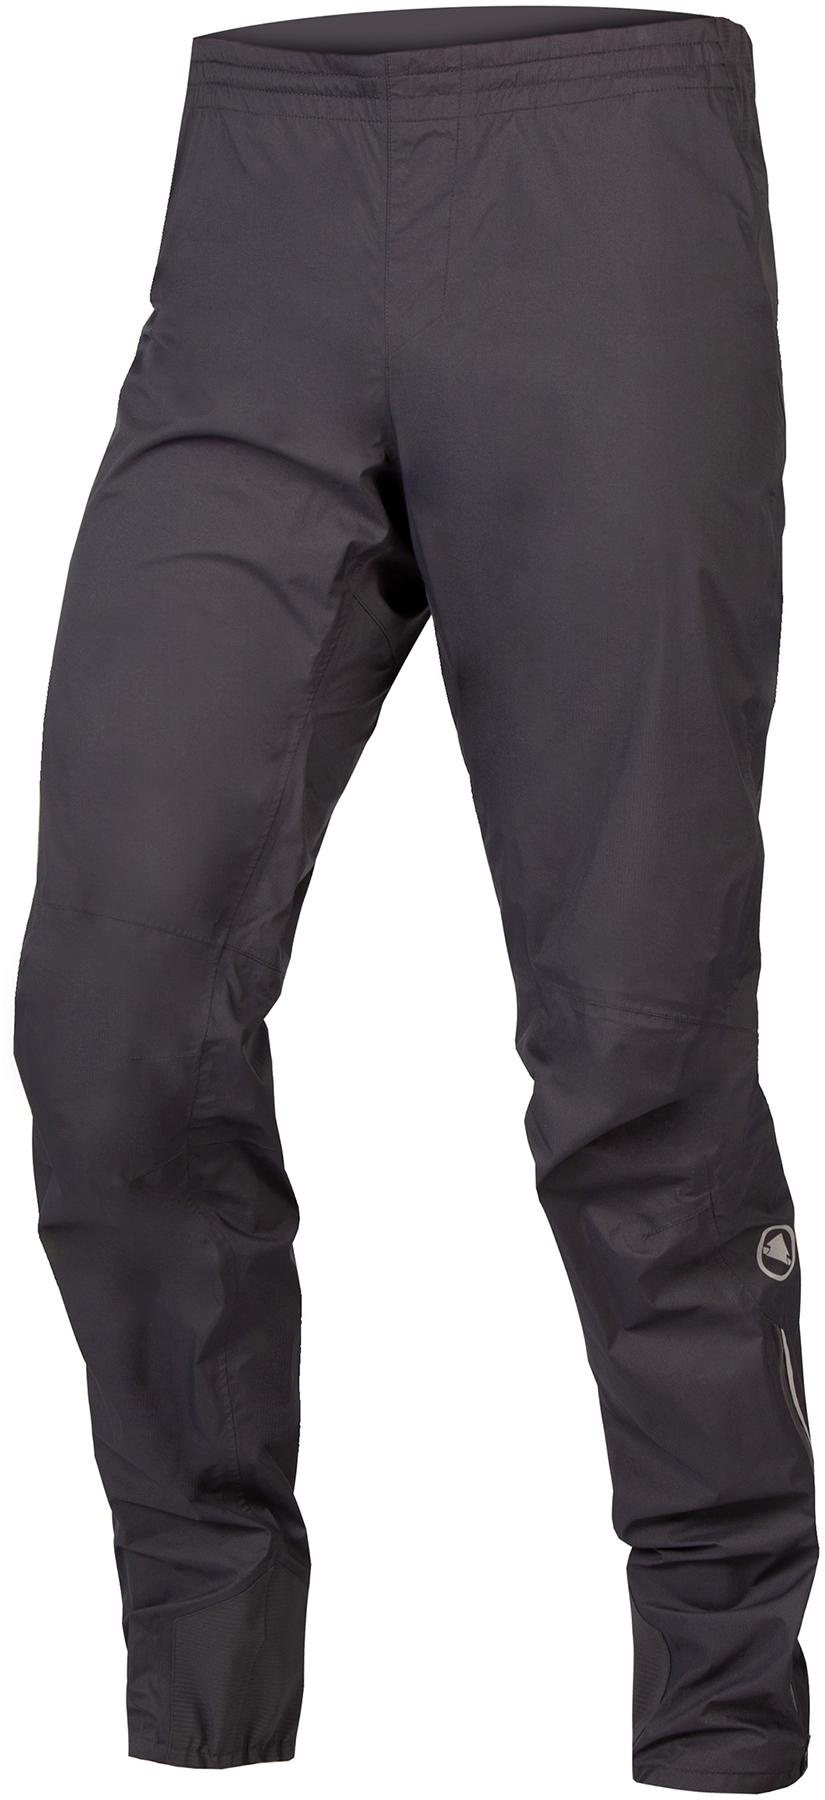 Endura Gv500 Waterproof Cycling Trousers - Anthracite